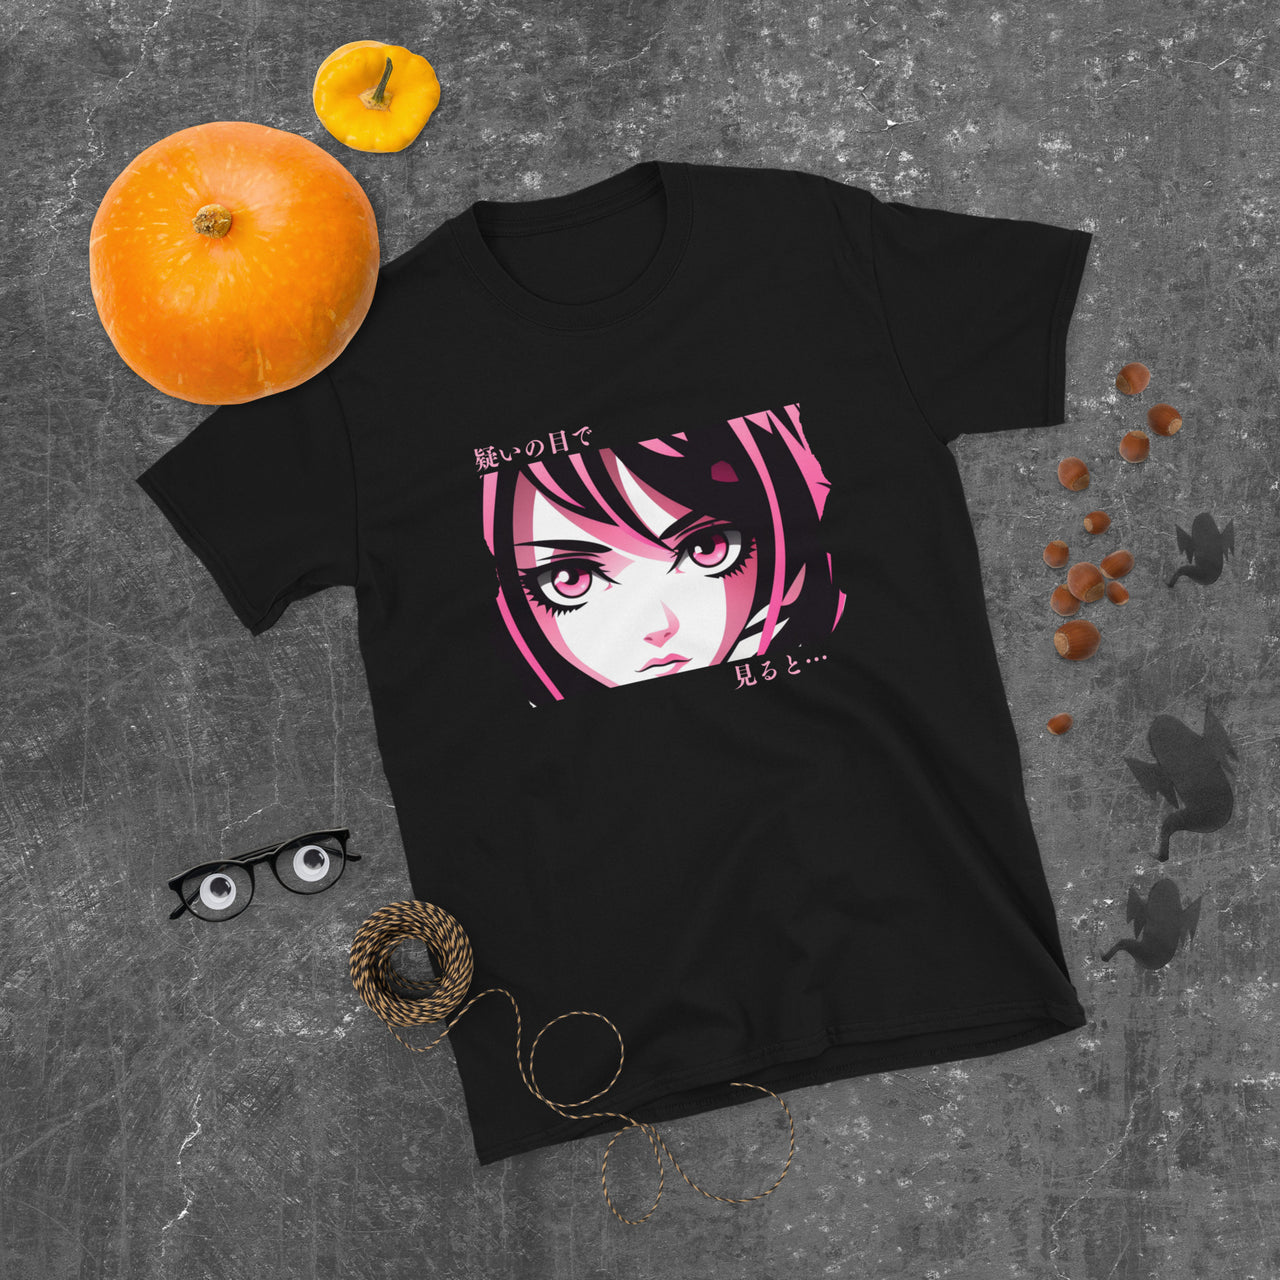 Looking with Suspicious Anime Eyes T-Shirt